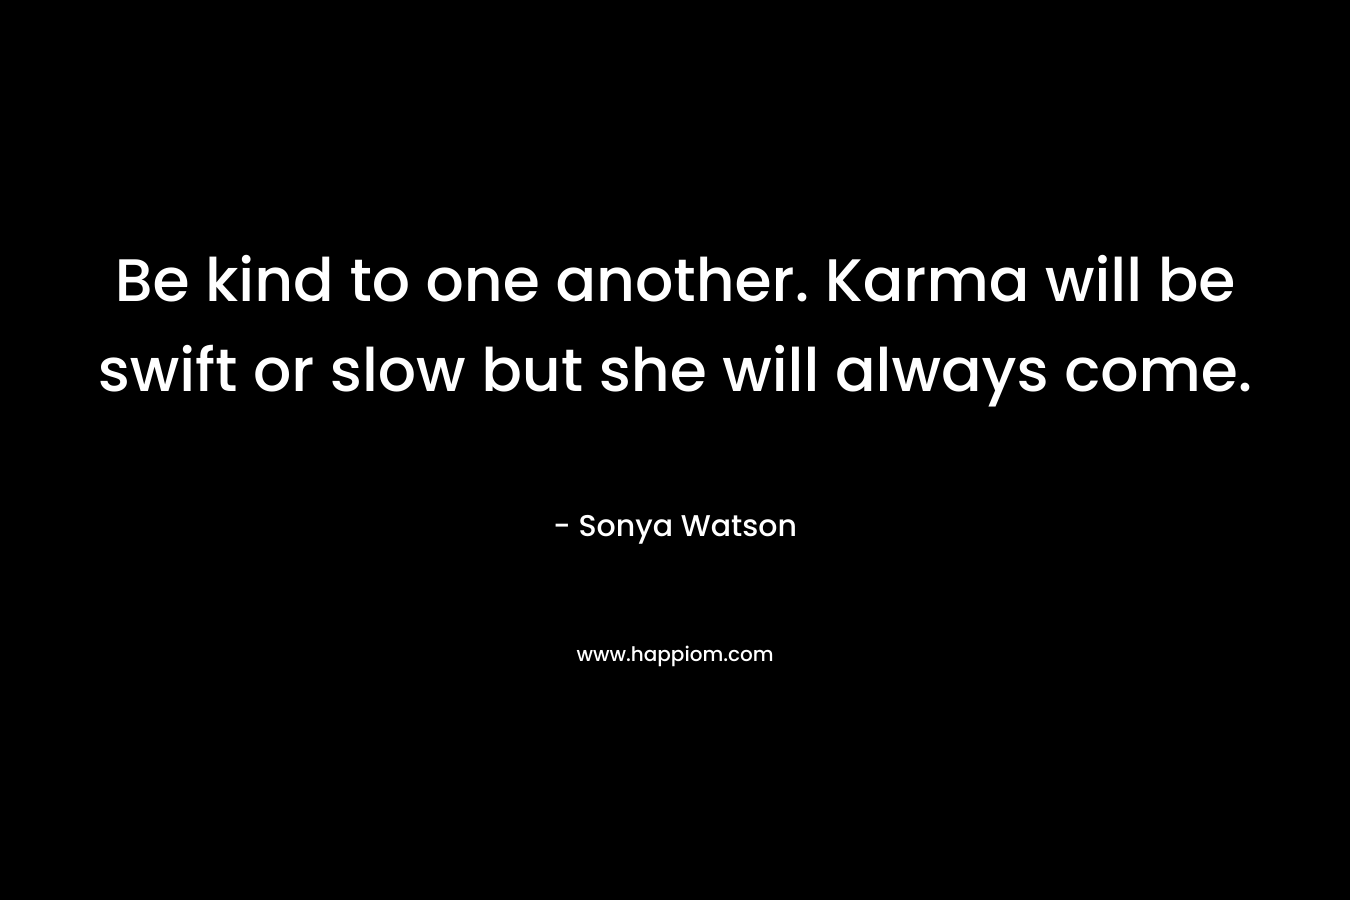 Be kind to one another. Karma will be swift or slow but she will always come. – Sonya Watson